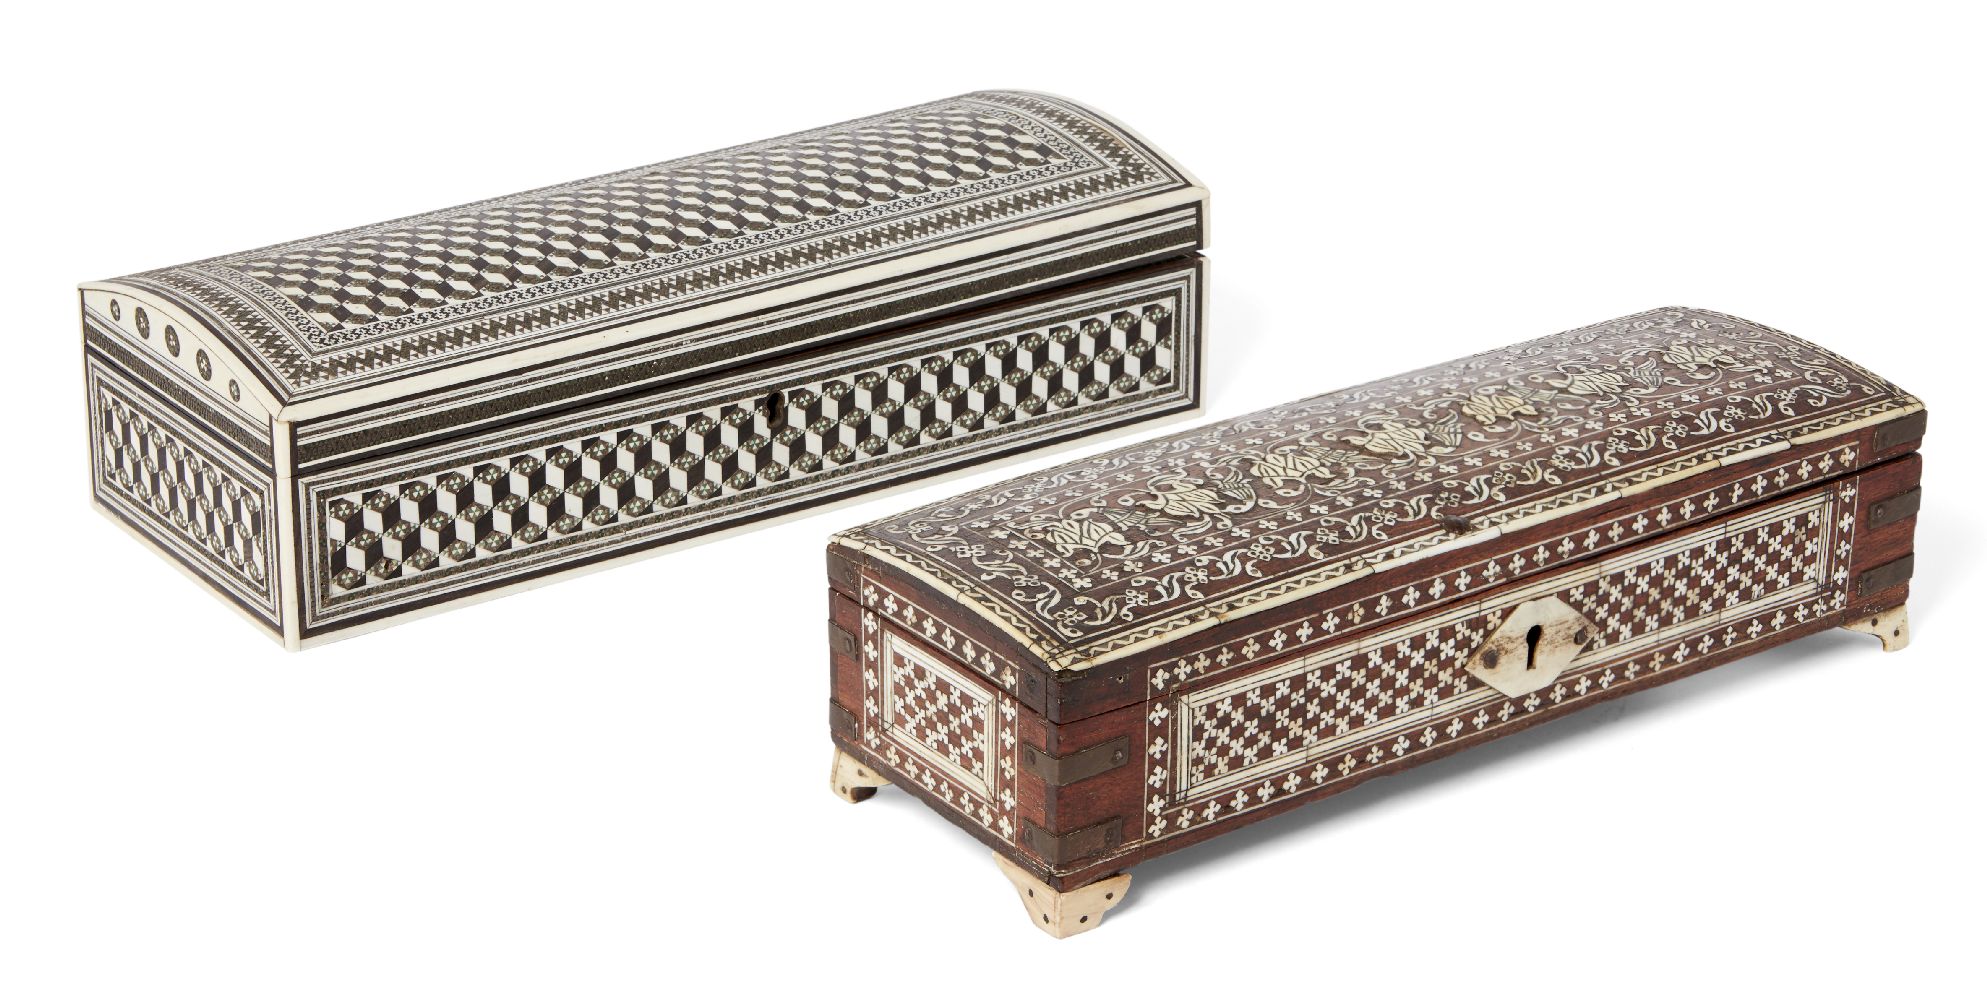 Two boxes, Vizagapatam and Horshiapur, India, 19th century, both of rectangular form, the first with